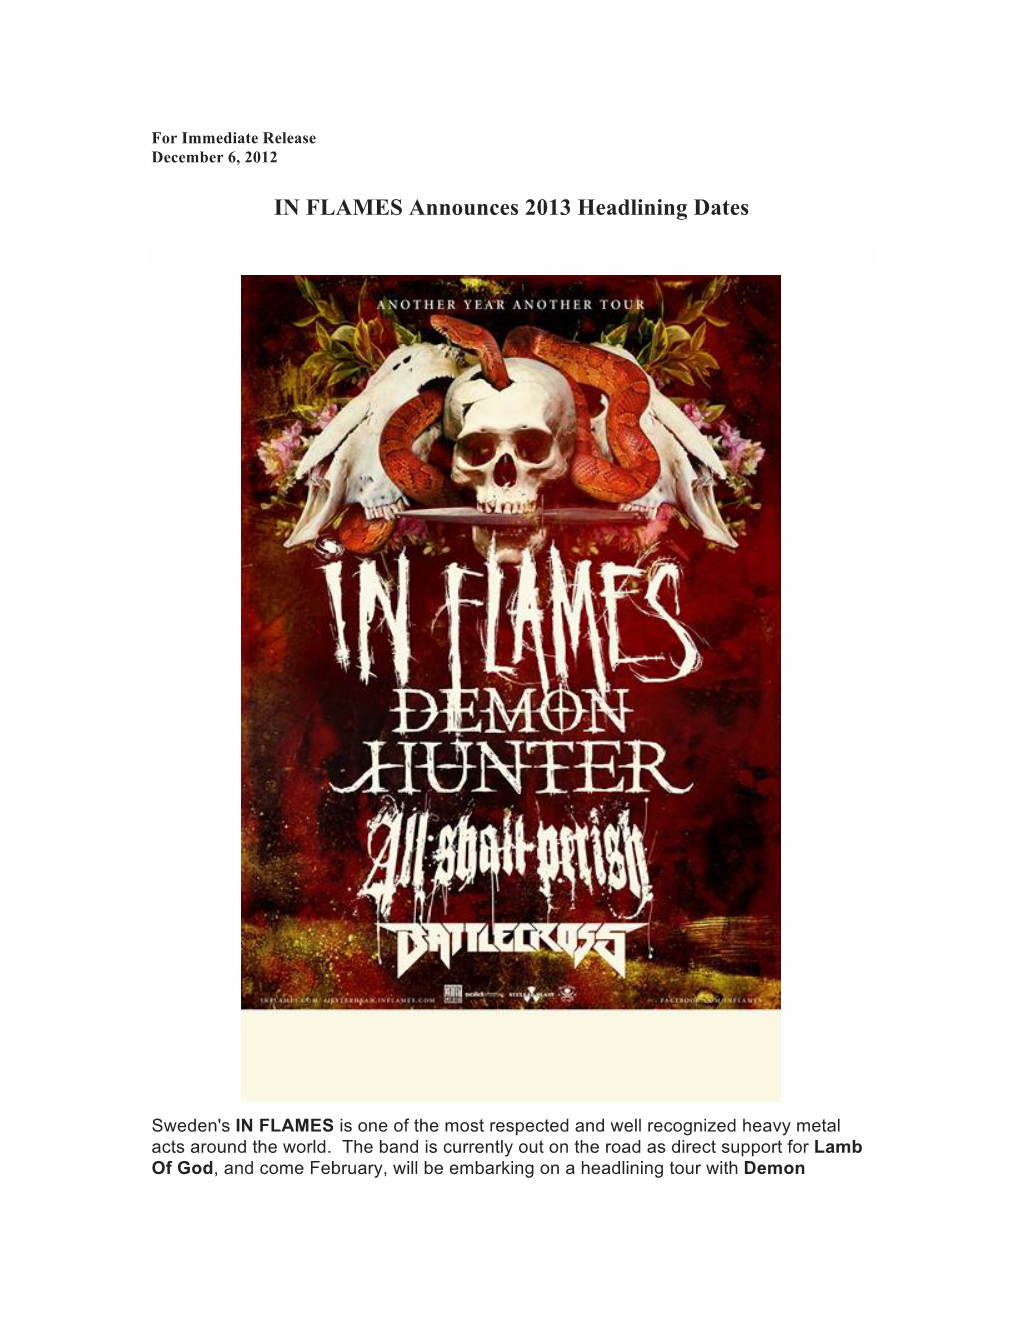 IN FLAMES Announces 2013 Headlining Dates